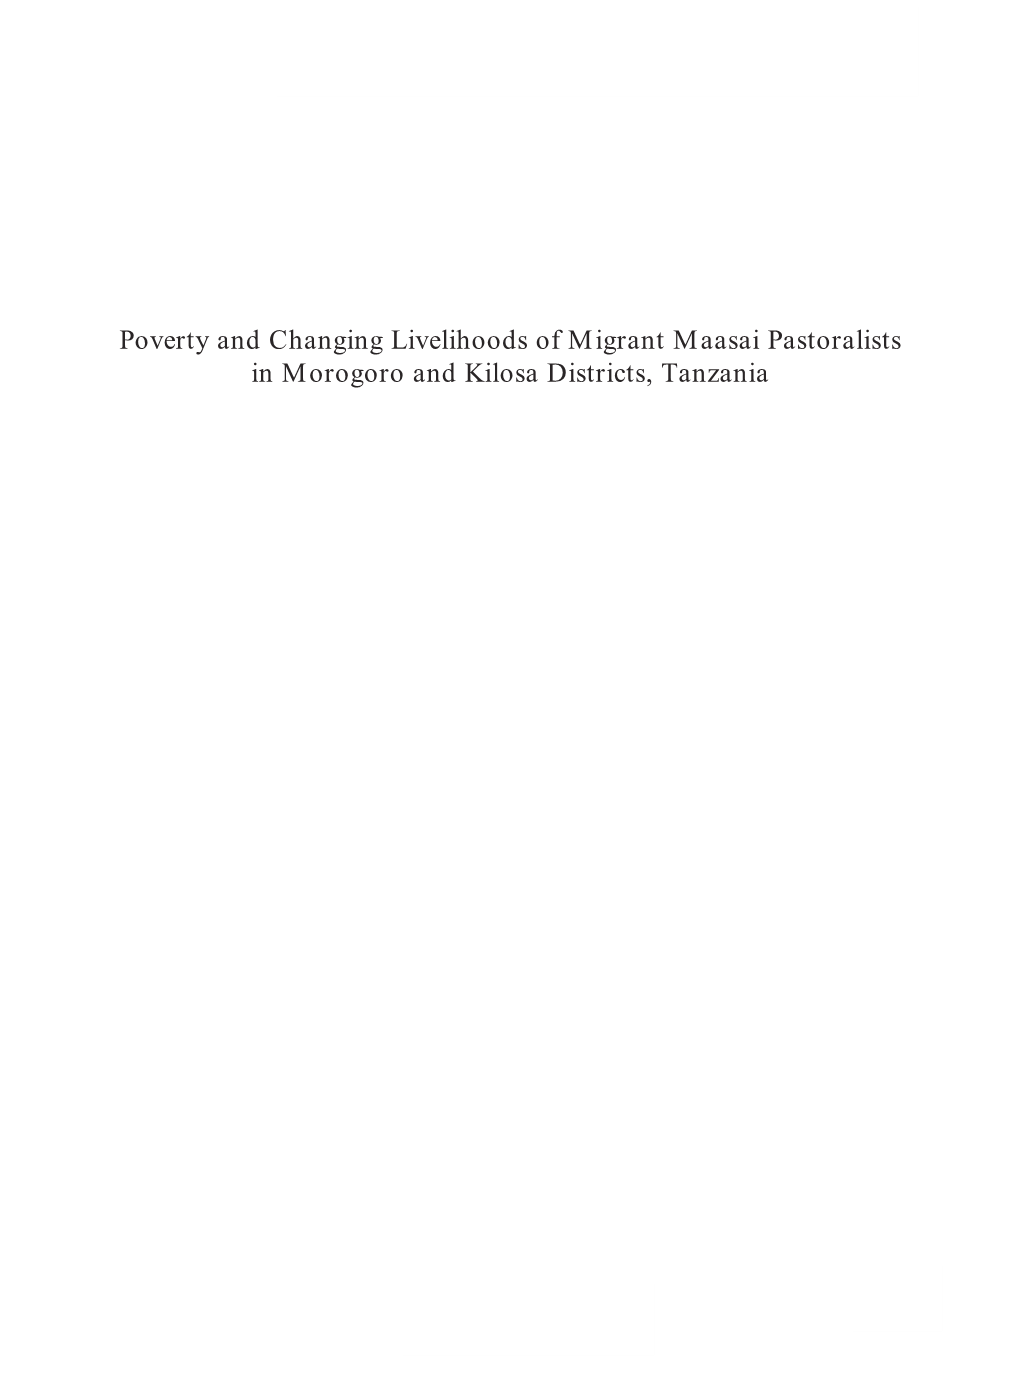 Poverty and Changing Livelihoods of Migrant Maasai Pastoralists in Morogoro and Kilosa Districts, Tanzania